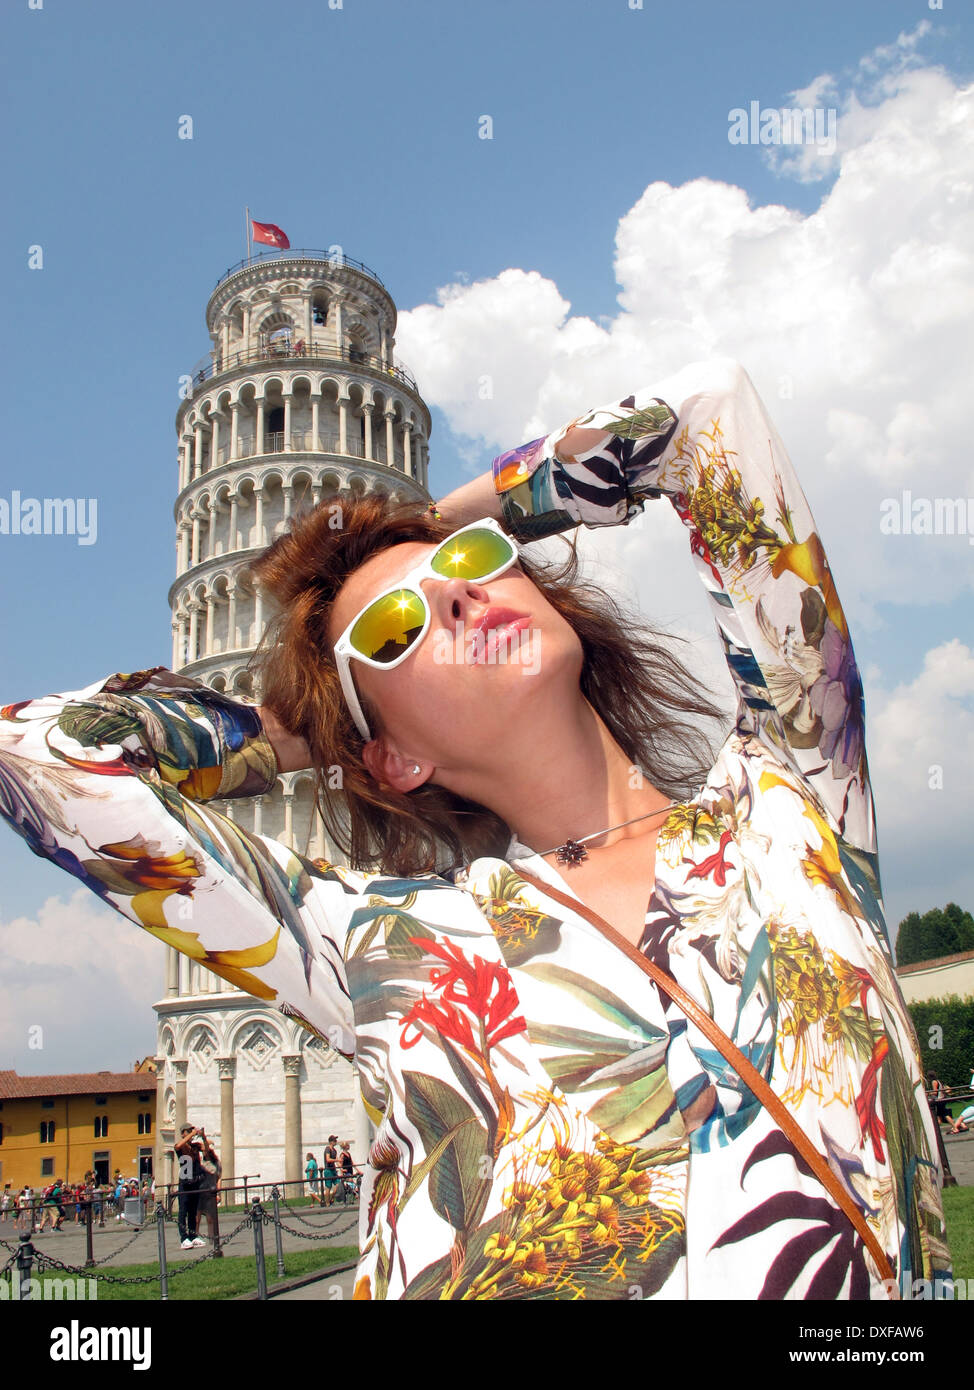 Italy, Tuscany, Pisa, Girl posing by Leaning Tower of Pisa Stock Photo